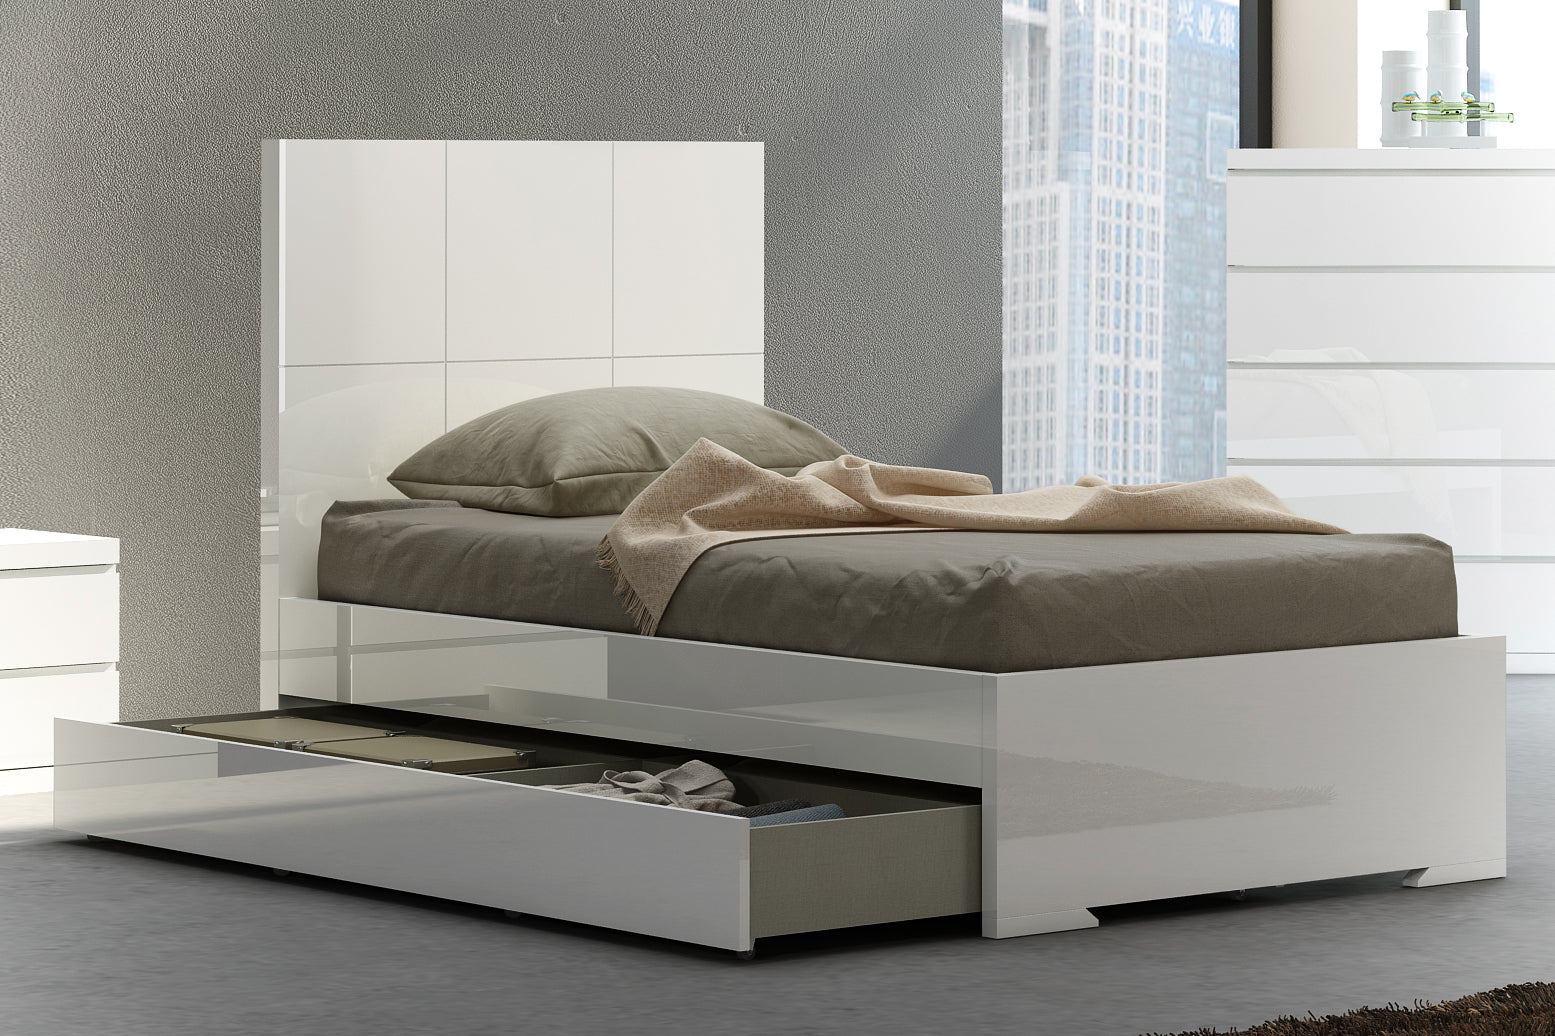 42 X 79 X 48 Gloss White Stainless Steel Twin Bed